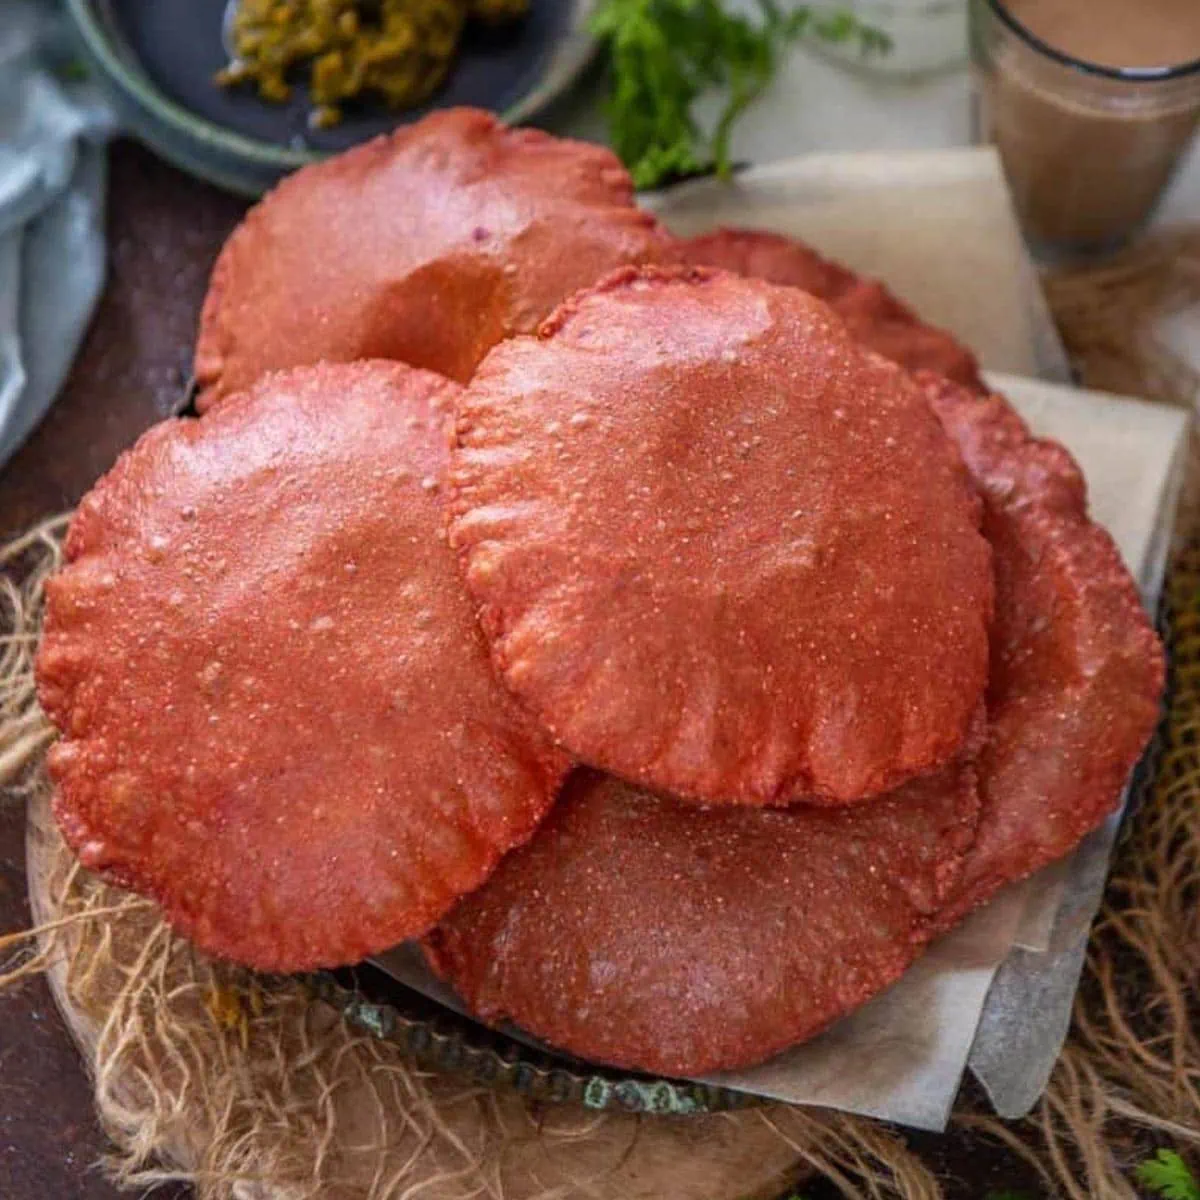 Beetroot poori served on a plate.